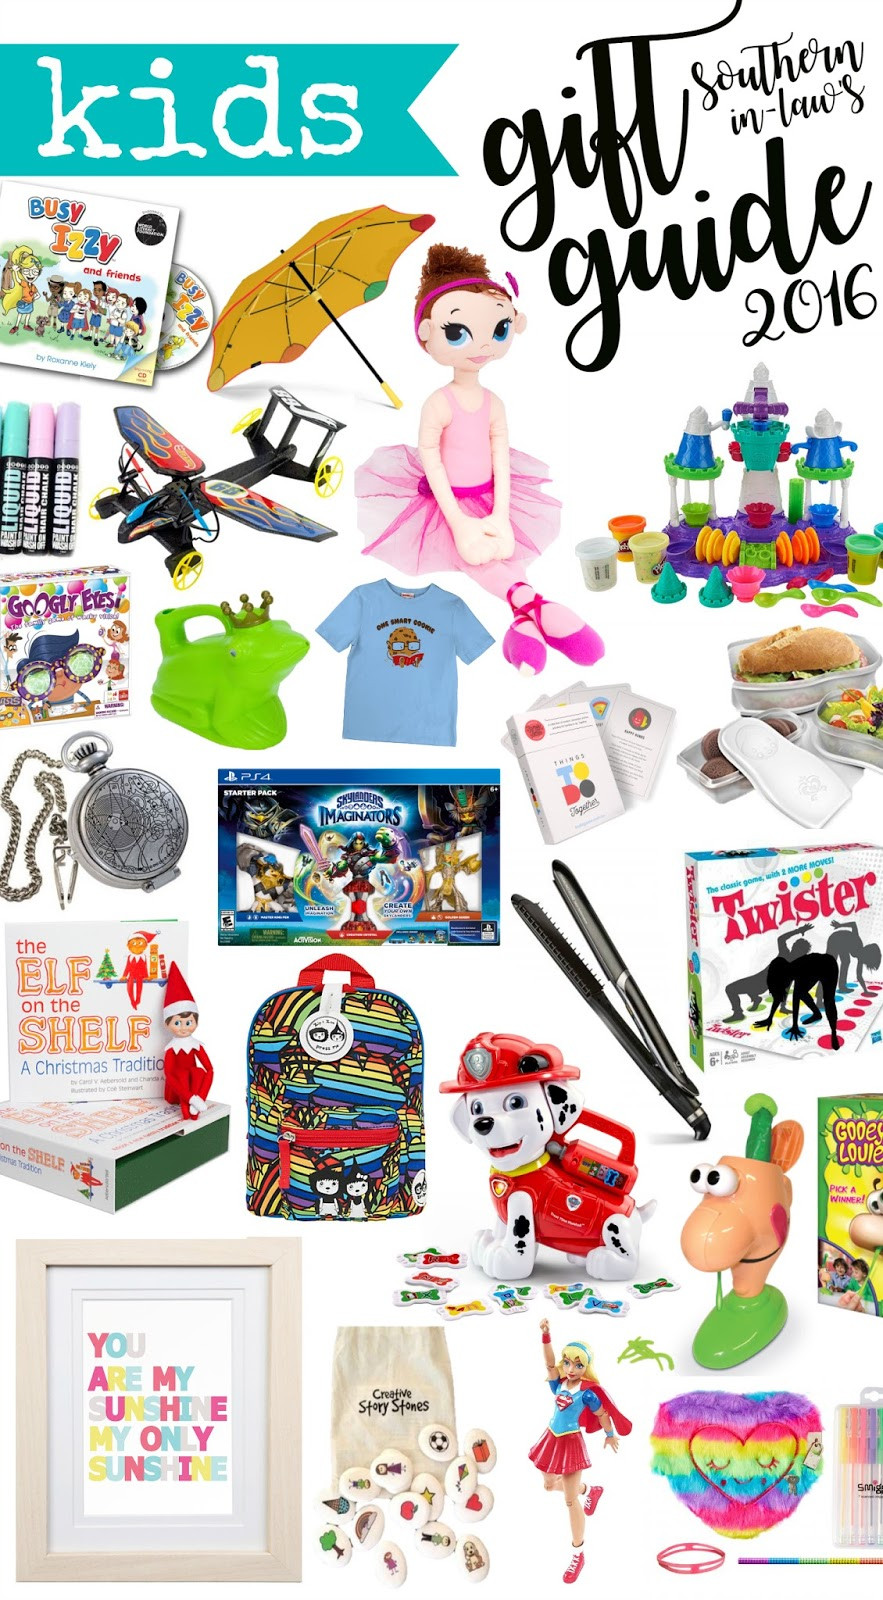 Popular Kids Gifts
 Southern In Law 2016 Kids Christmas Gift Guide